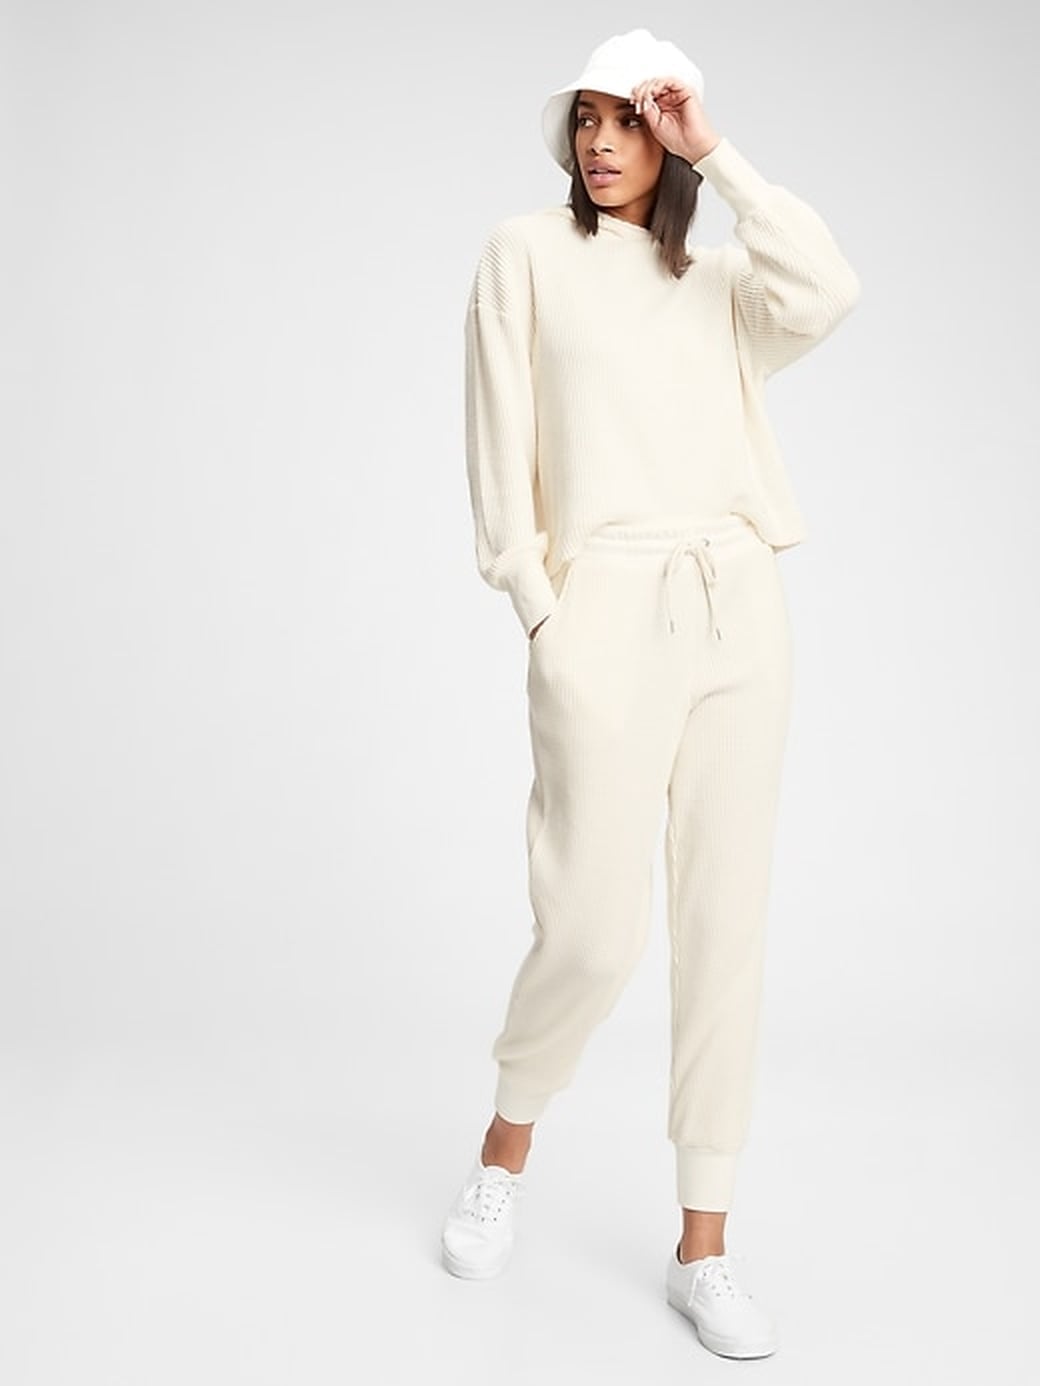 Cozy Clothes and Accessories From Gap Under $50 | POPSUGAR Fashion